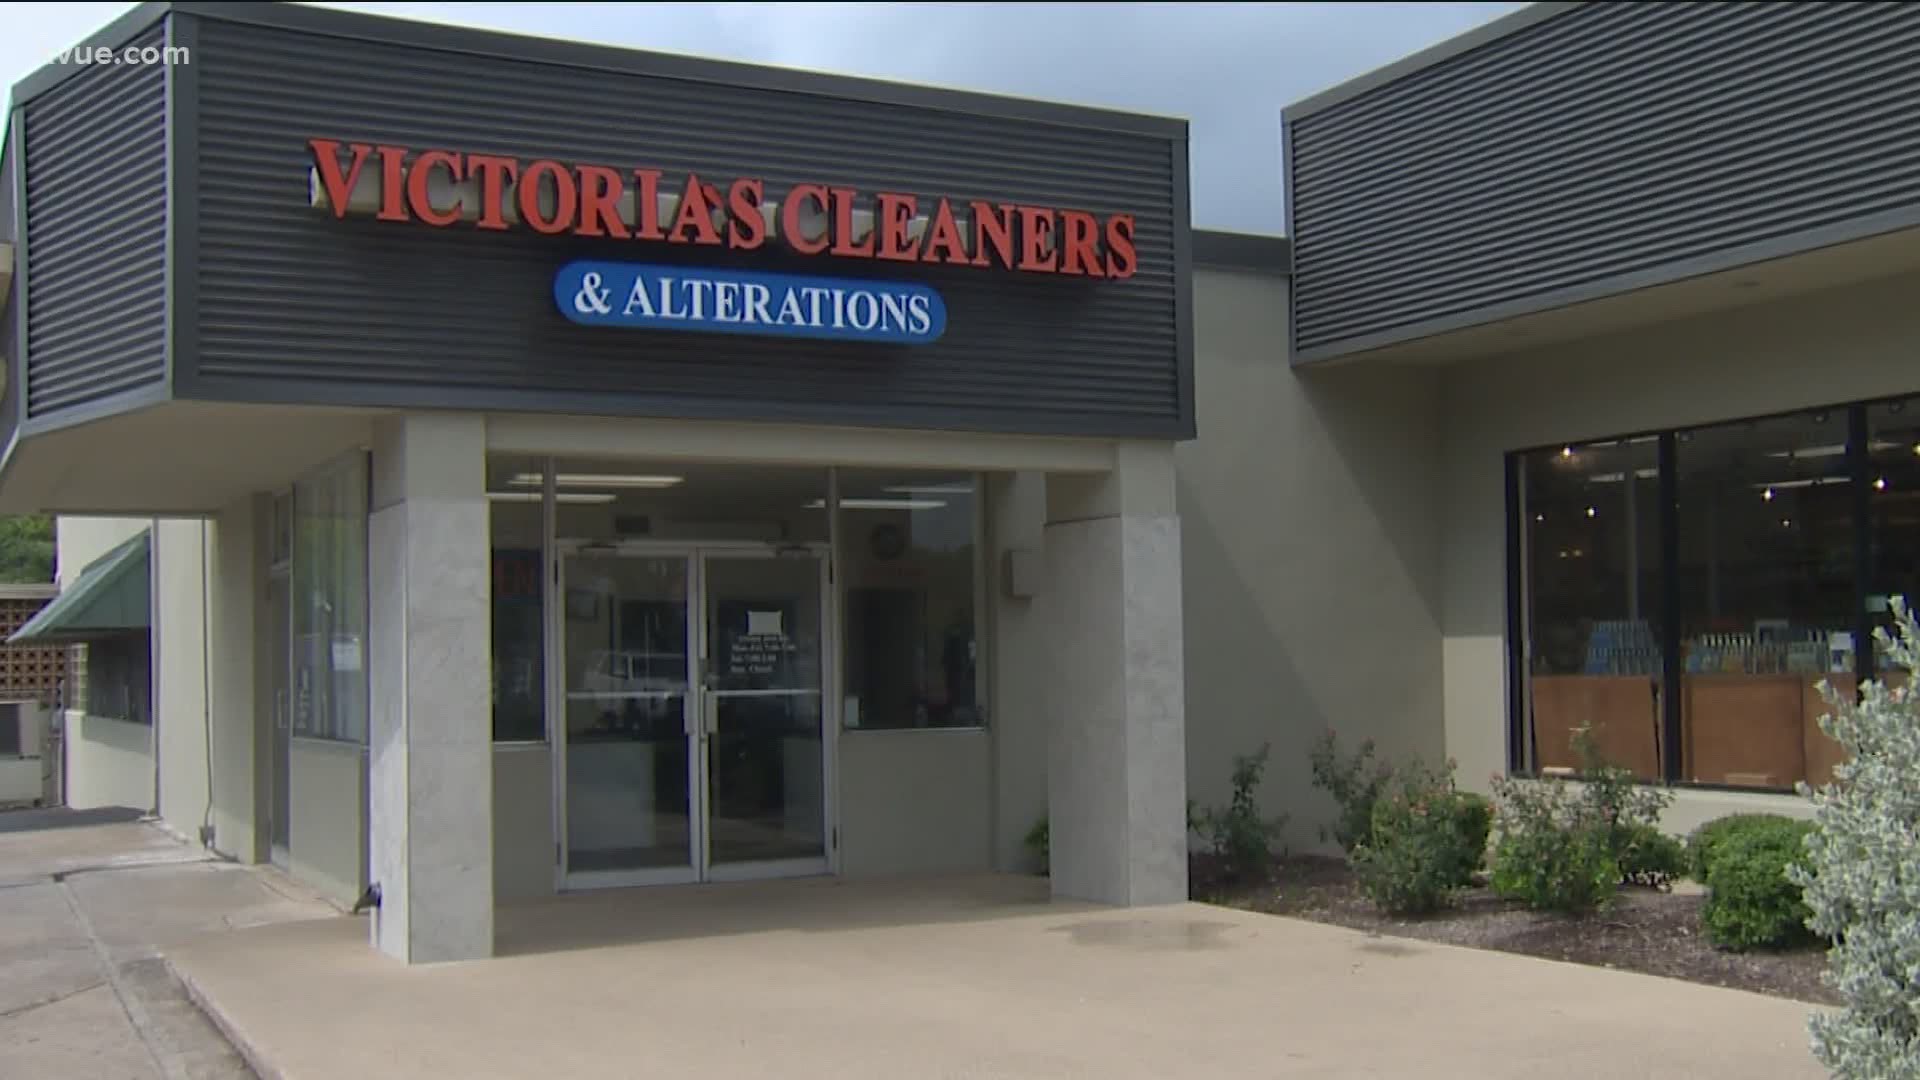 The impacts of COVID-19 have claimed another small business in Austin. The owners of Victoria's Cleaners told Jenni Lee they're spending this week saying goodbye.